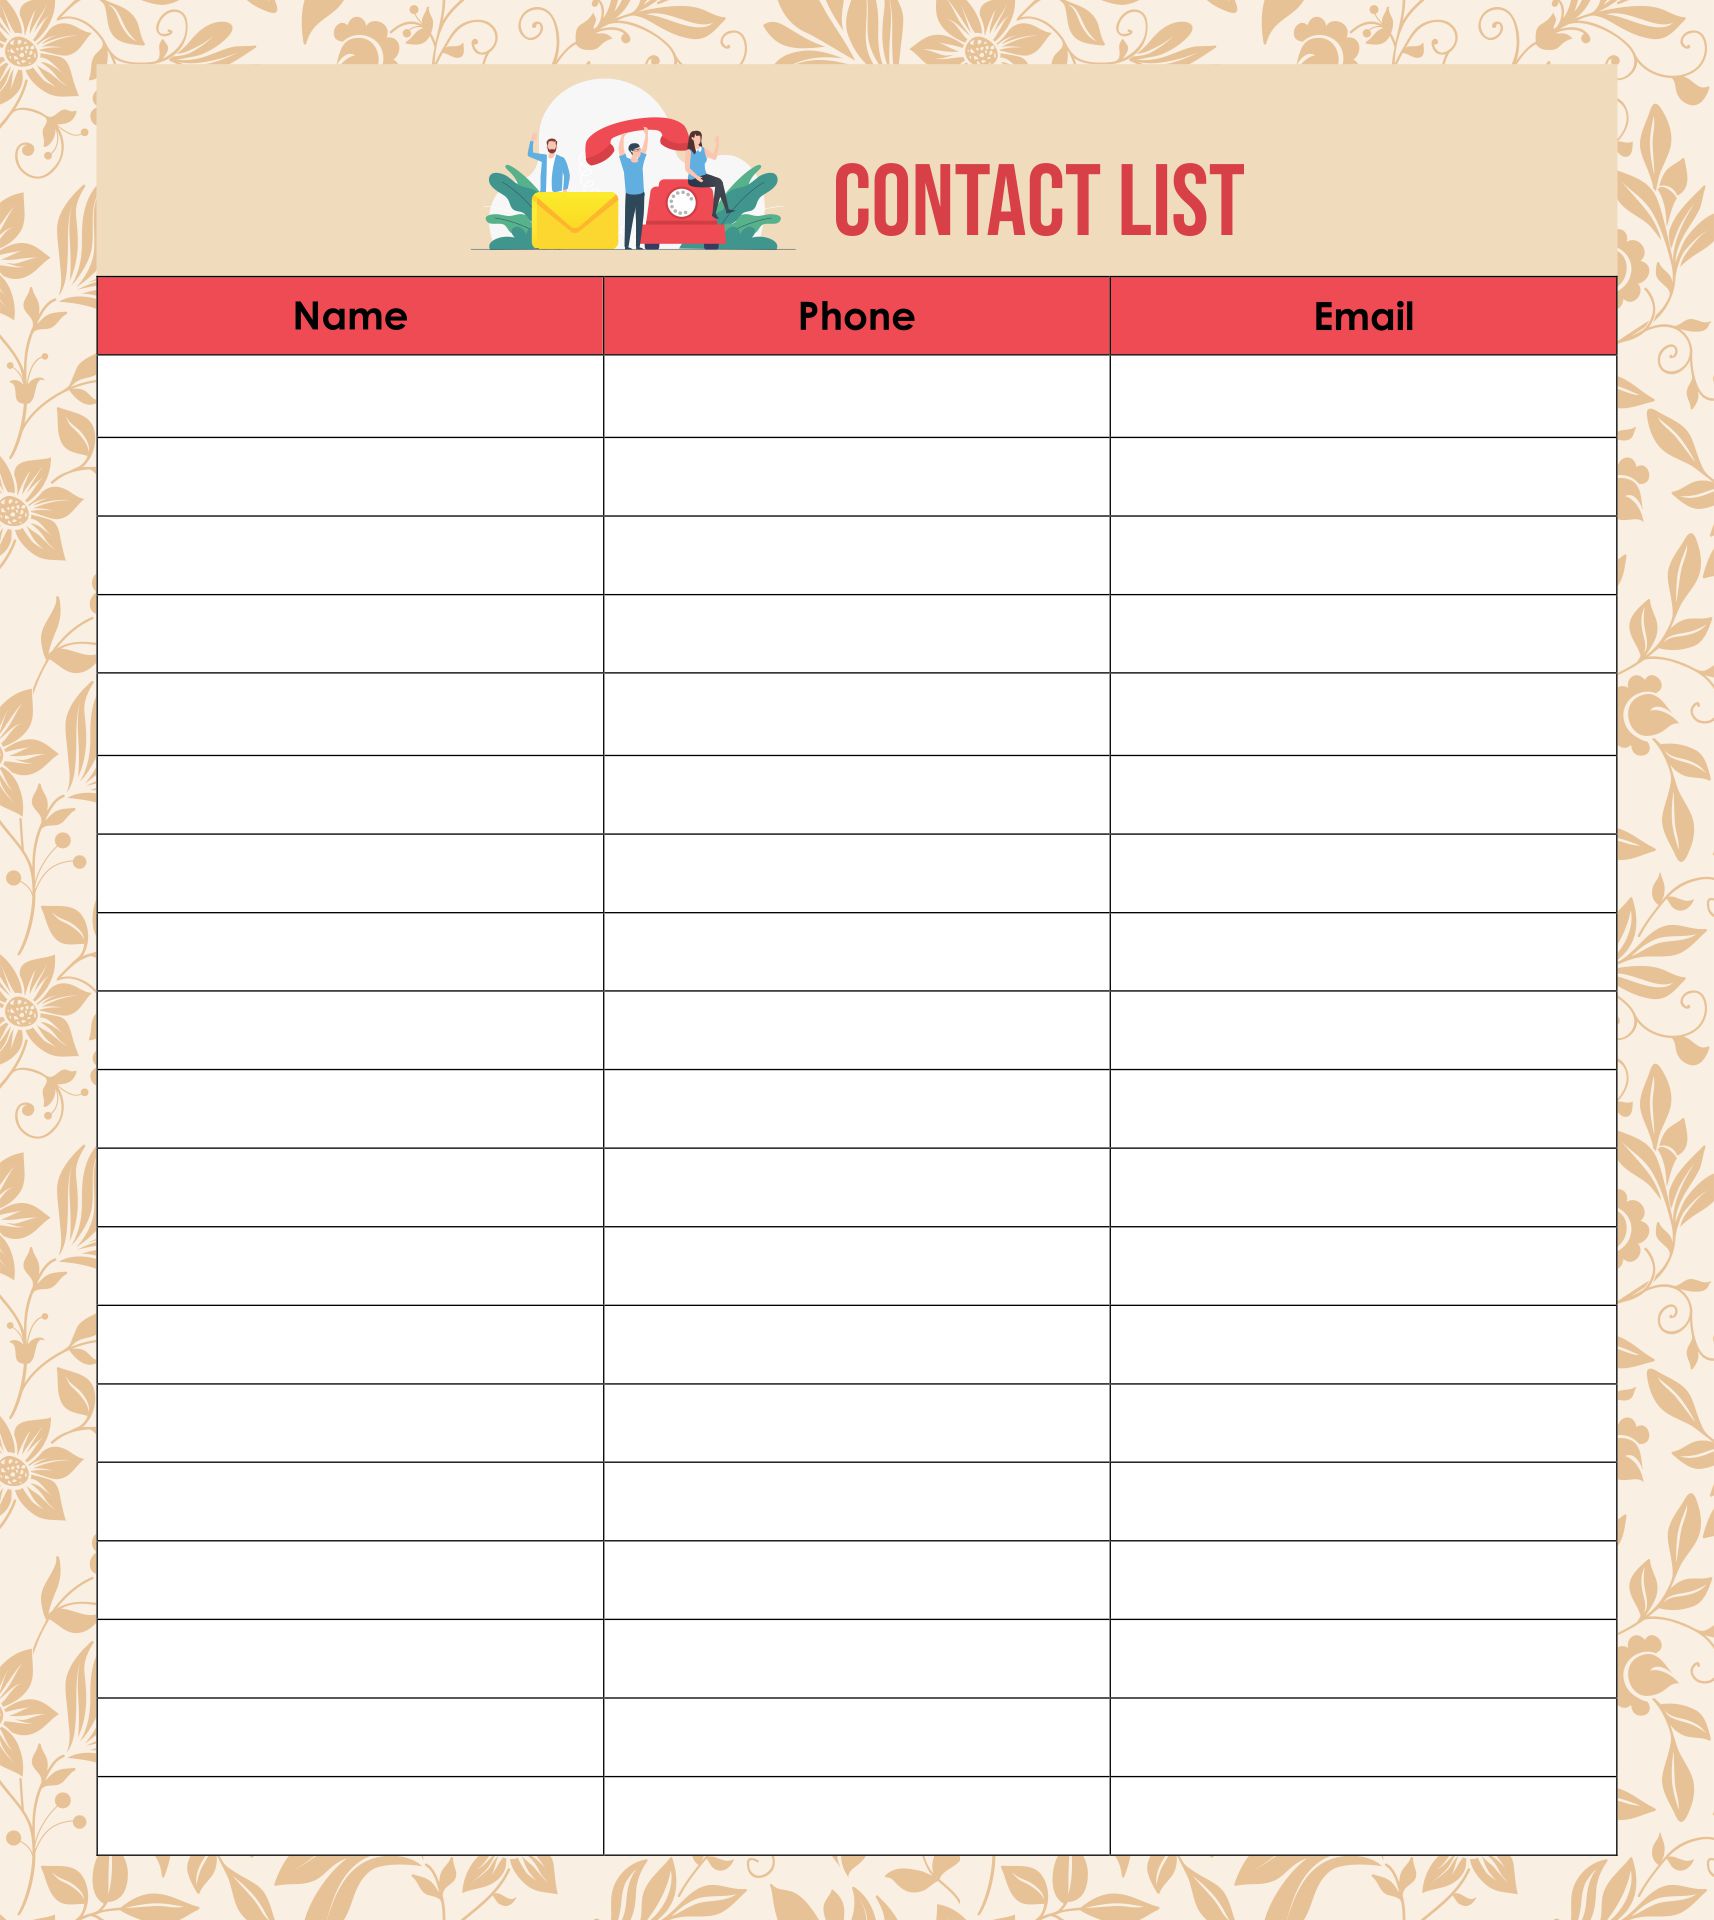 7-best-images-of-phone-contact-list-template-printable-printable-phone-list-template-free